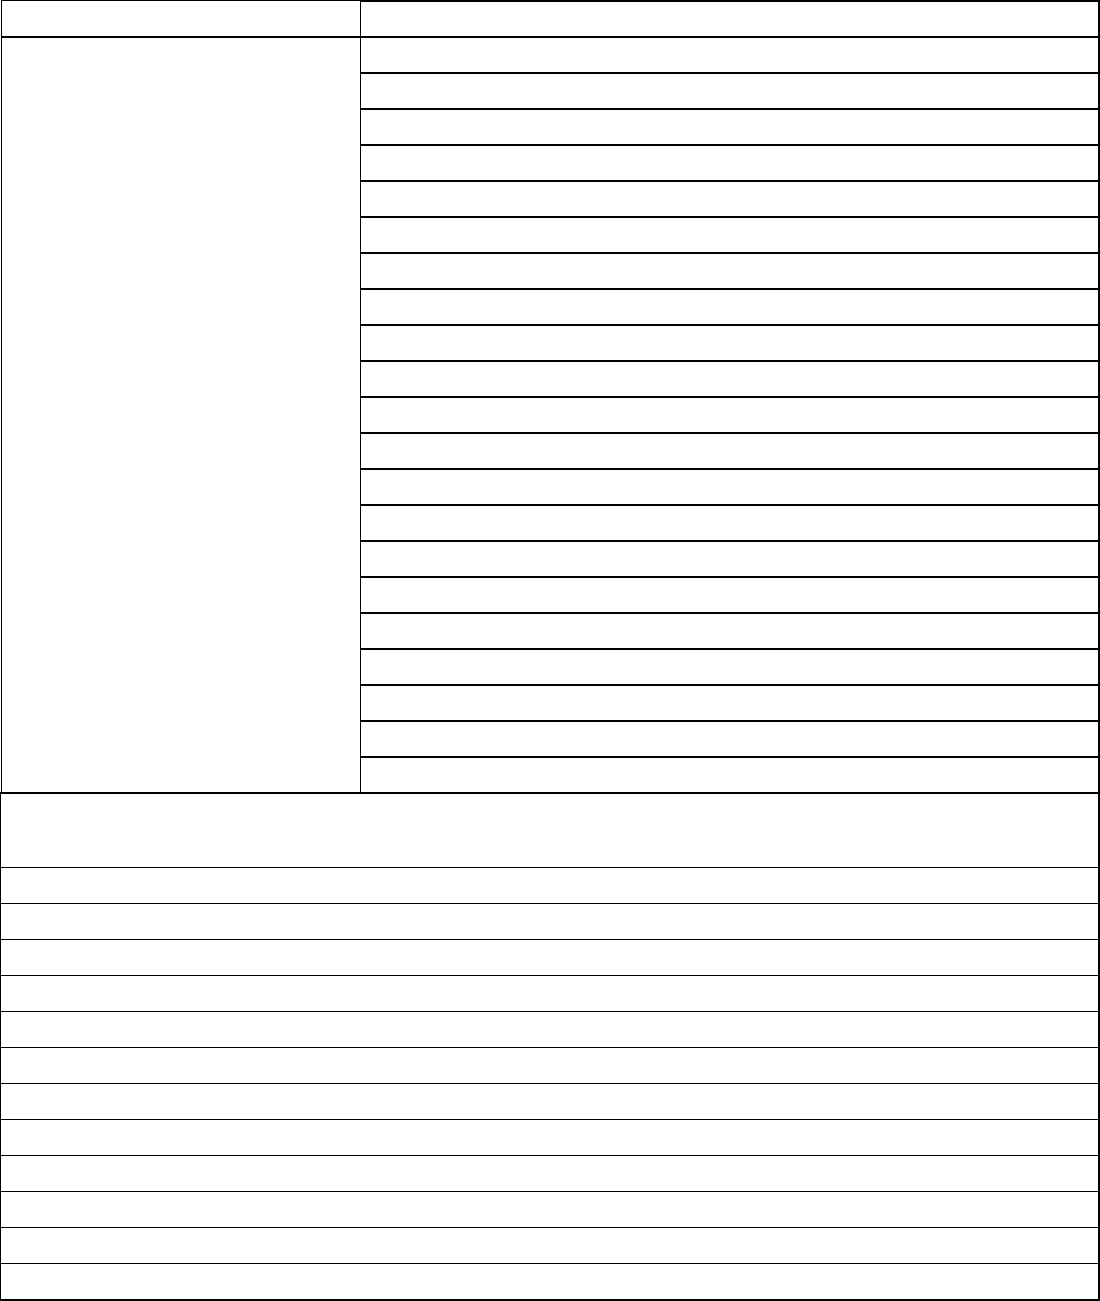 Free Cornell Notes Template - doc  2333KB  233 Page(s)  Page 233 In Cornell Notes Template Word Document